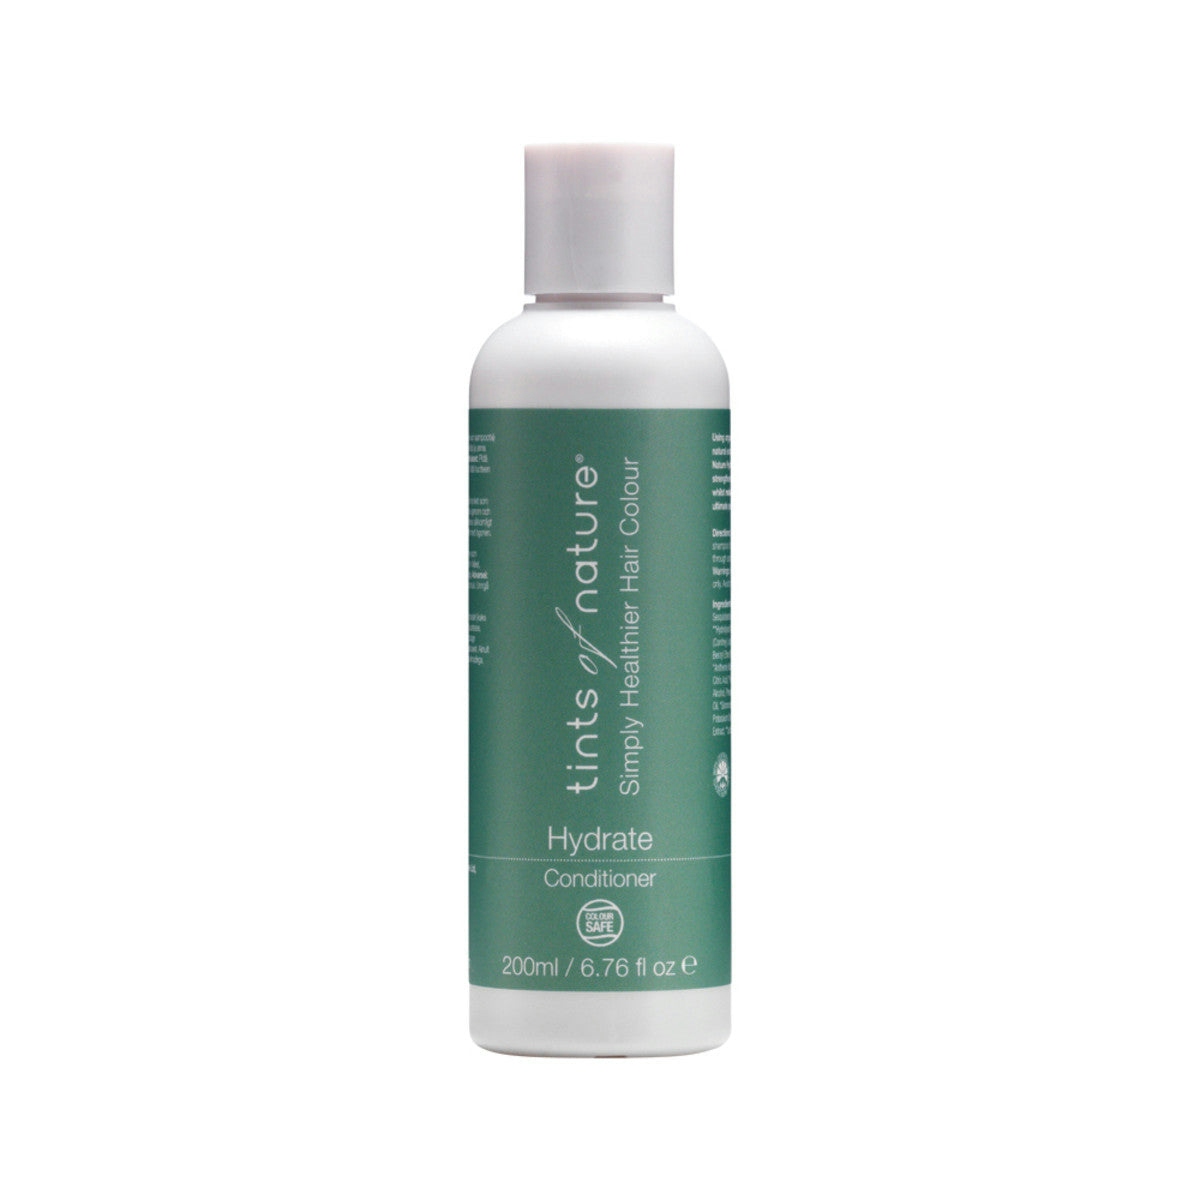 image of Tints of Nature Conditioner Hydrate 200ml on white background